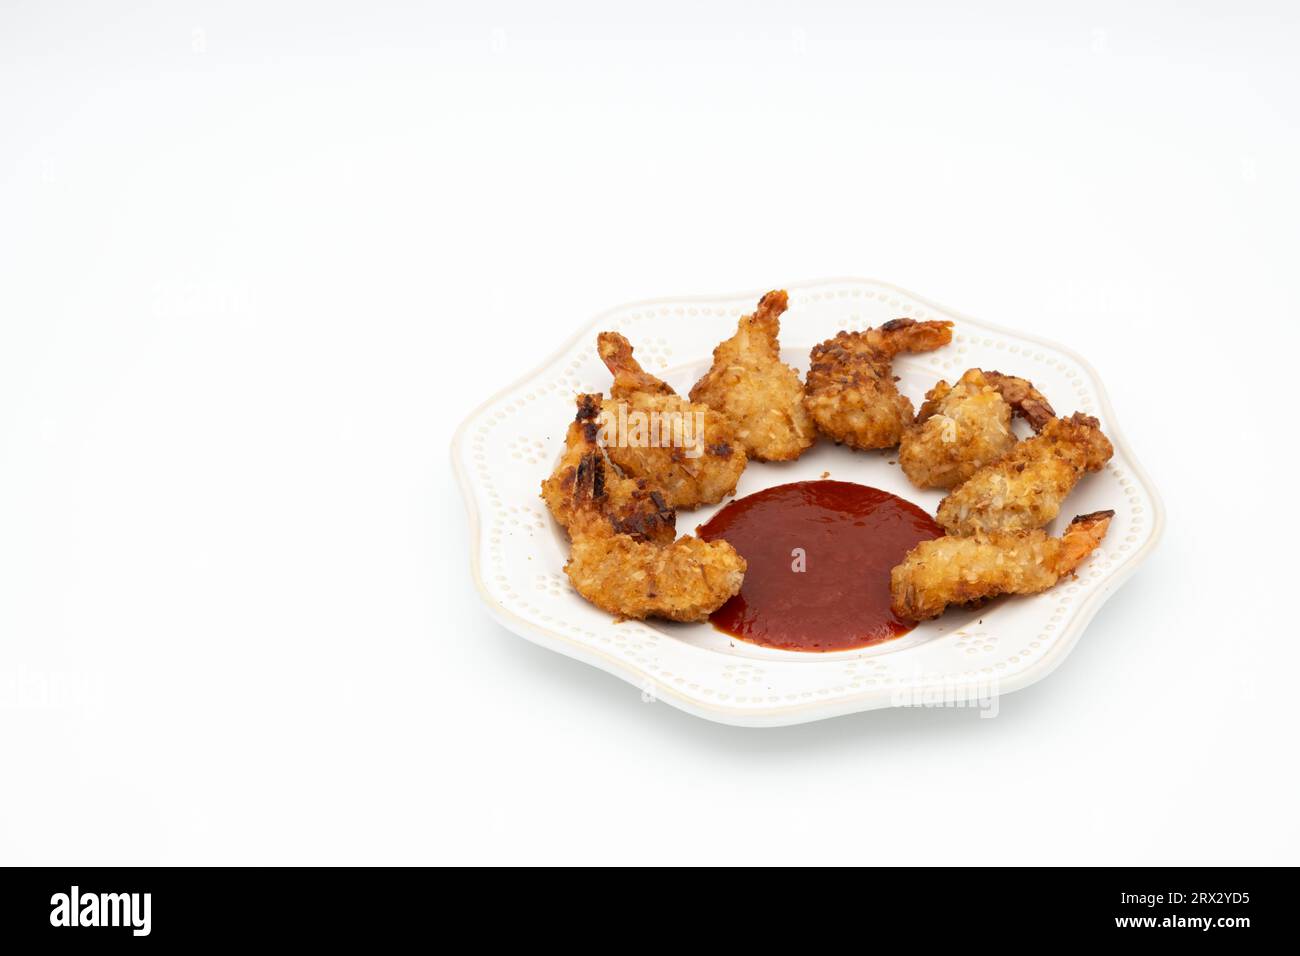 Tasty baked coconut shrimp with red cocktail sauce.  Tail-on, jumbo shrimp coated in a coconut breadcrumb topping and served with red cocktail sauce Stock Photo